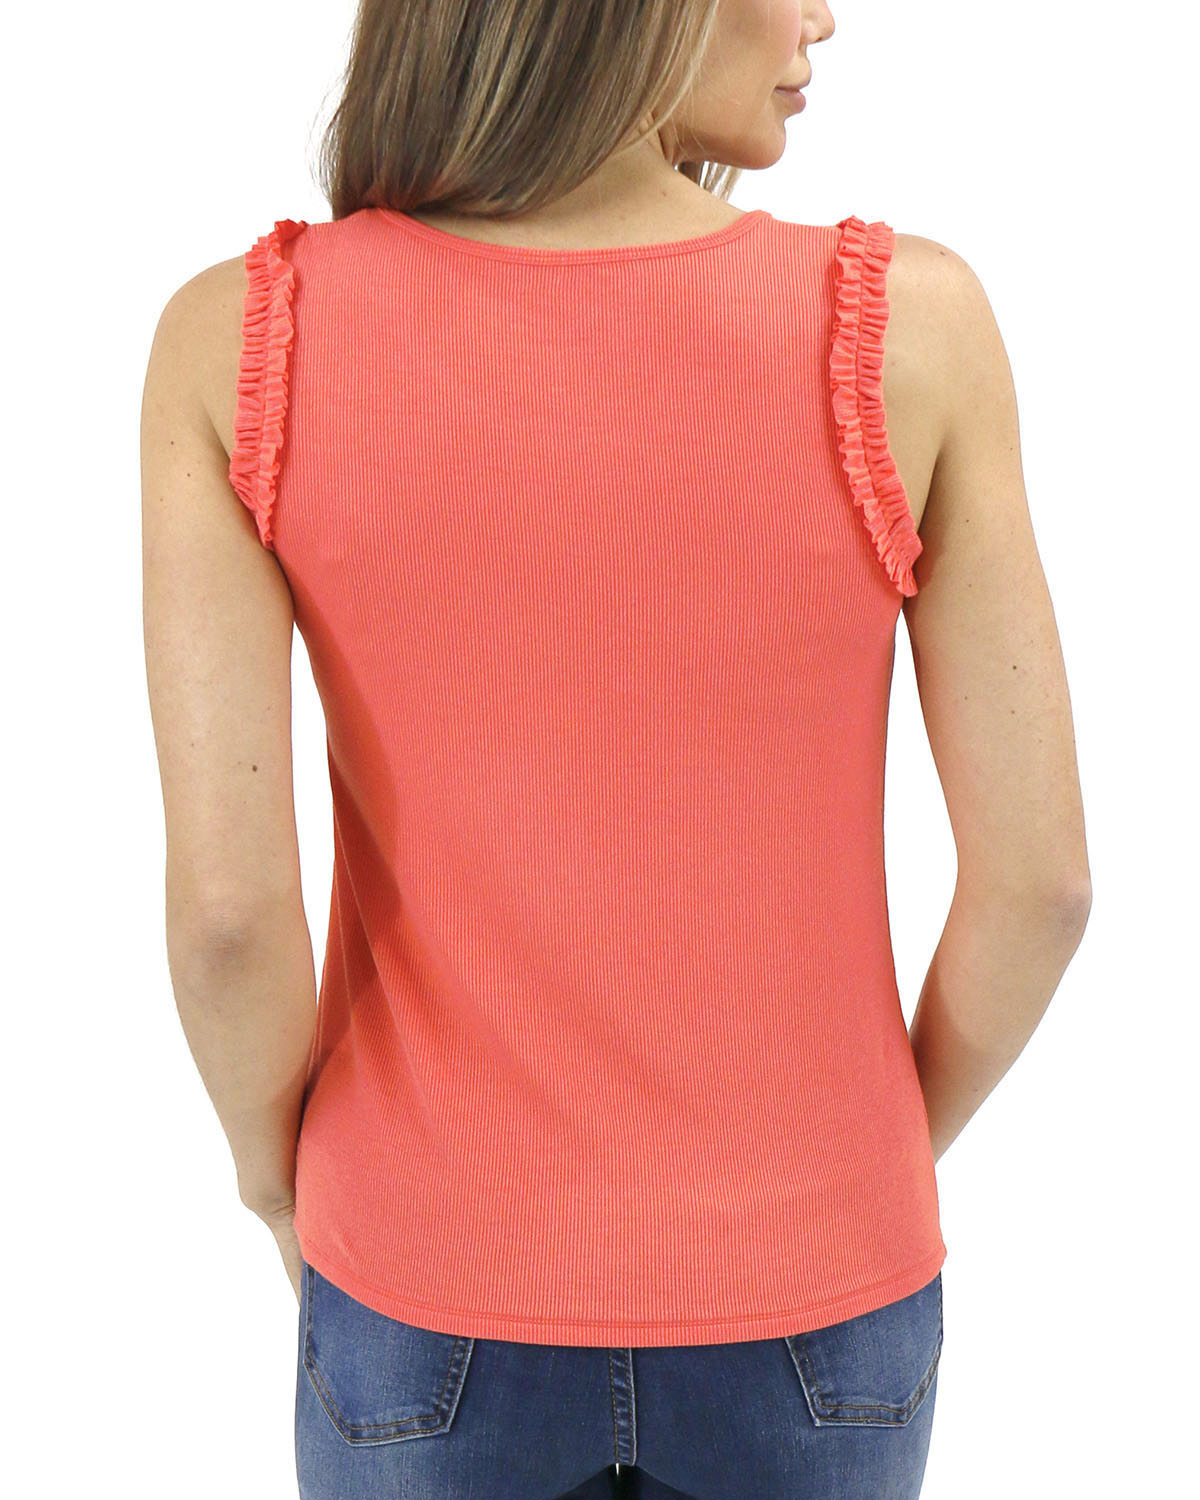 Ruffle & Ribbed Tank in Apricot